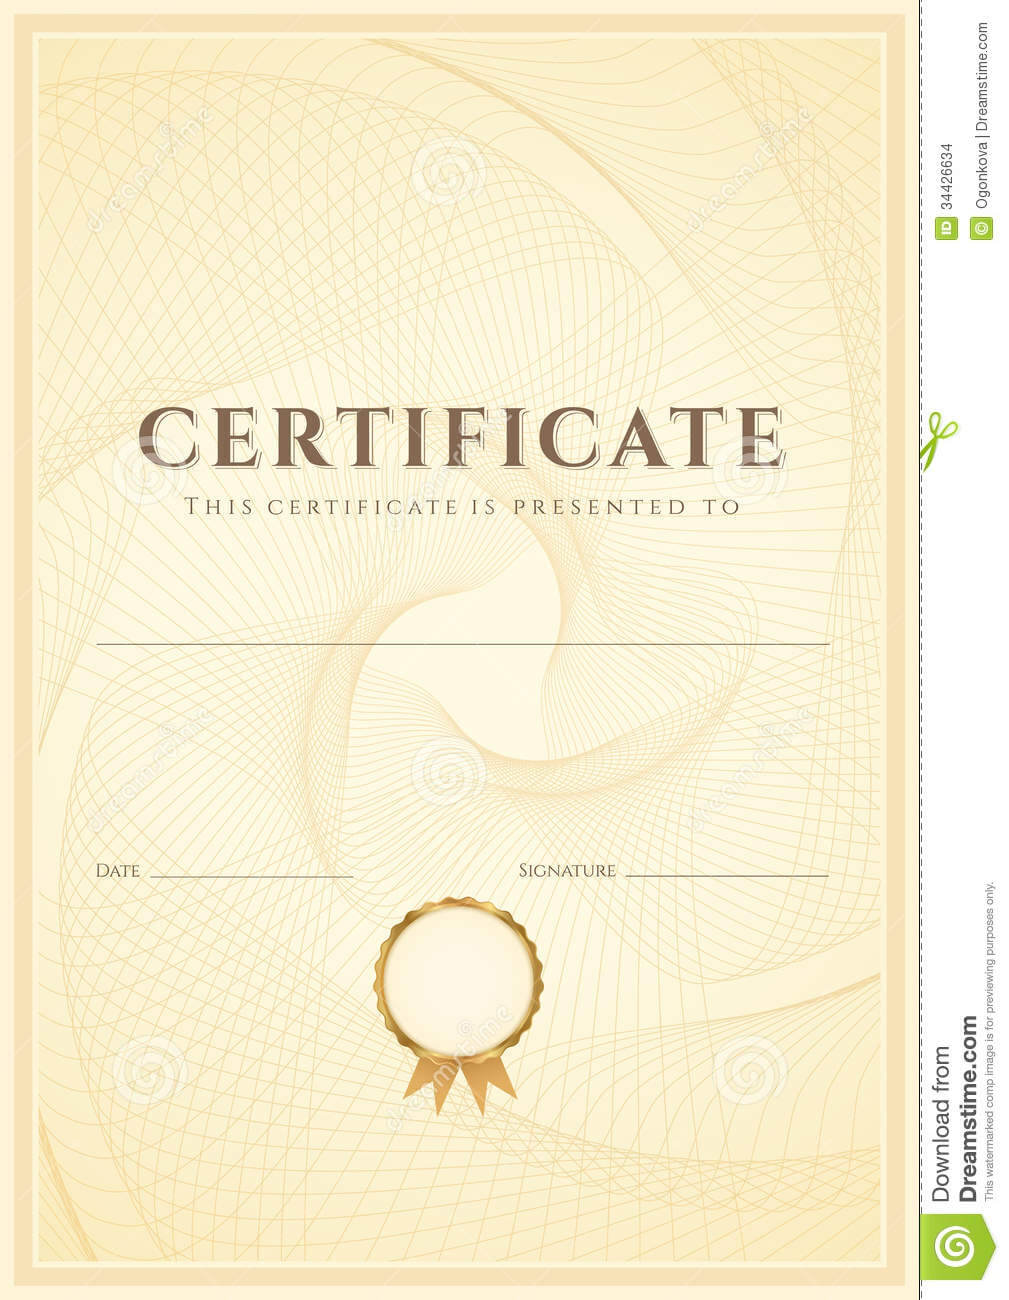 Certificate / Diploma Background Template. Pattern Stock With Certificate Scroll Template